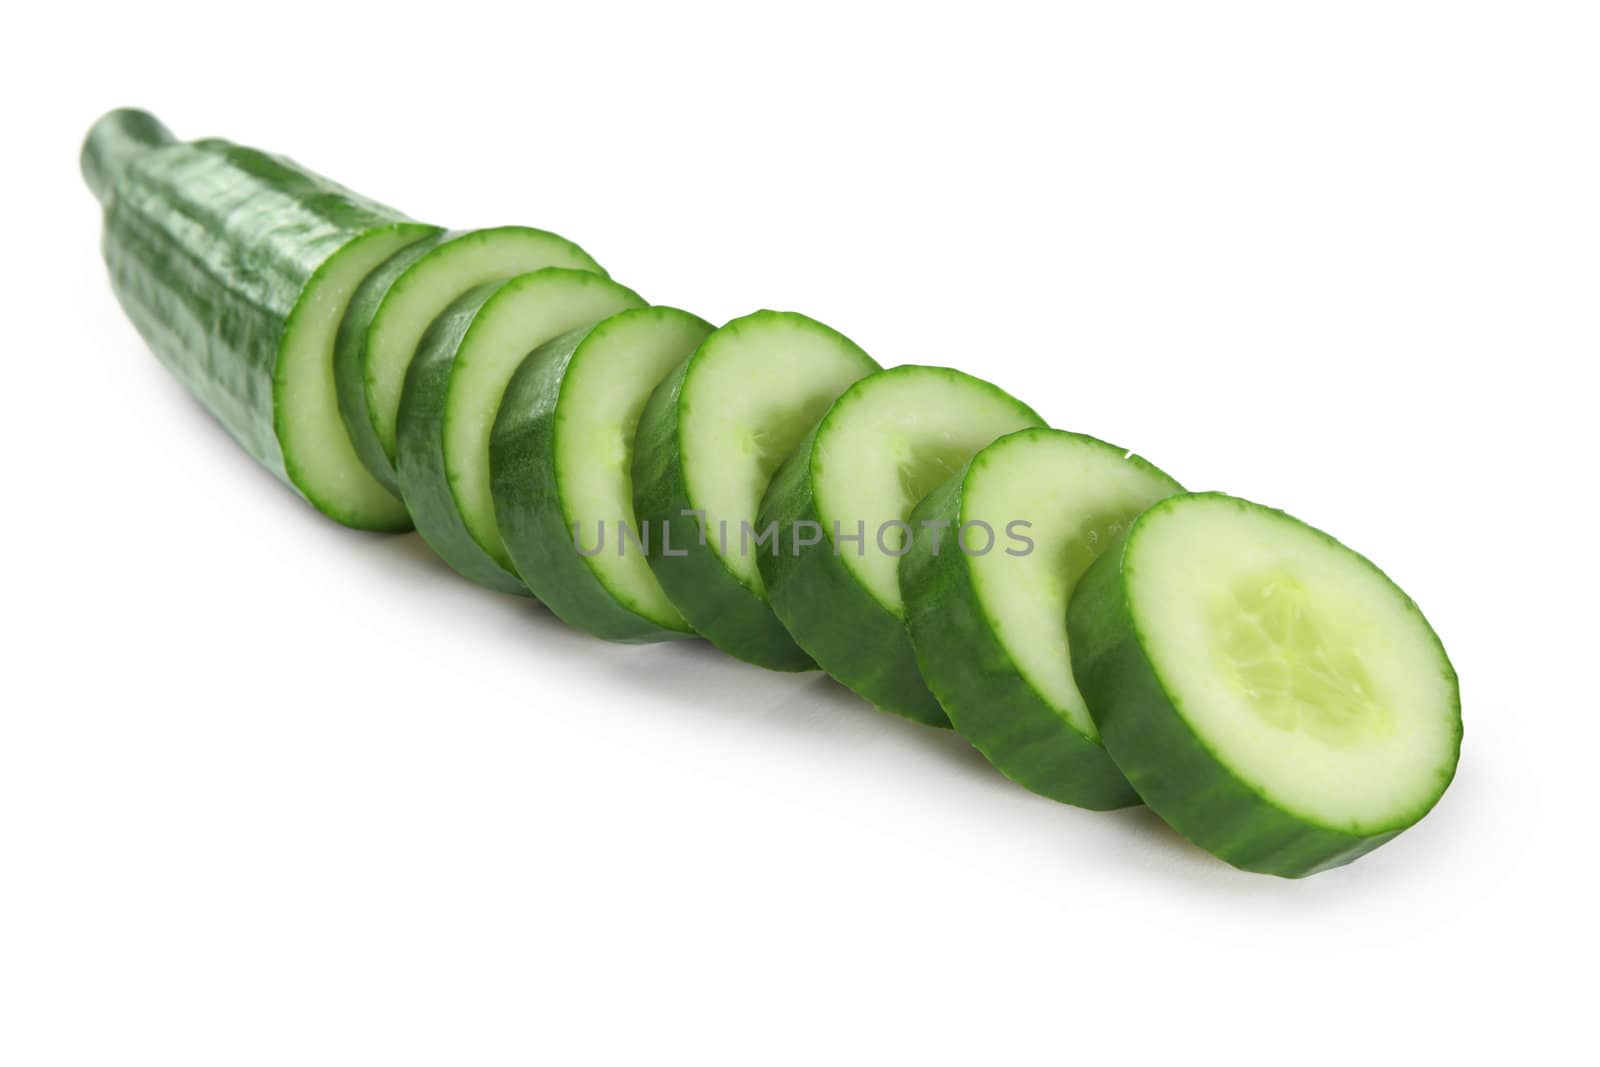 Cucumber cut into slices by sumners